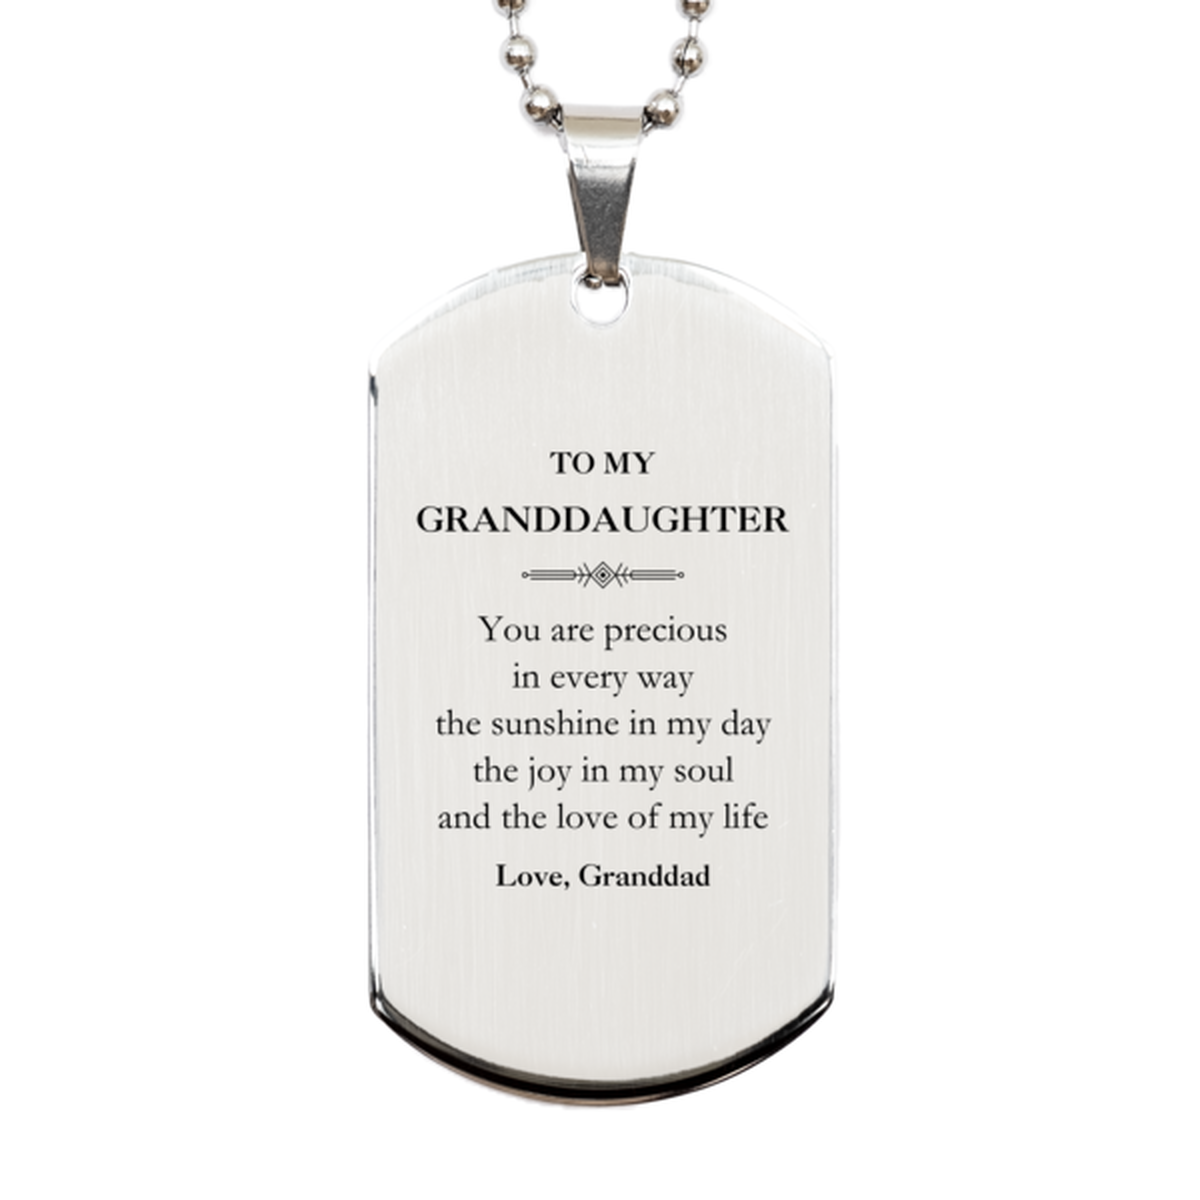 Graduation Gifts for Granddaughter Silver Dog Tag Present from Granddad, Christmas Granddaughter Birthday Gifts Granddaughter You are precious in every way the sunshine in my day. Love, Granddad